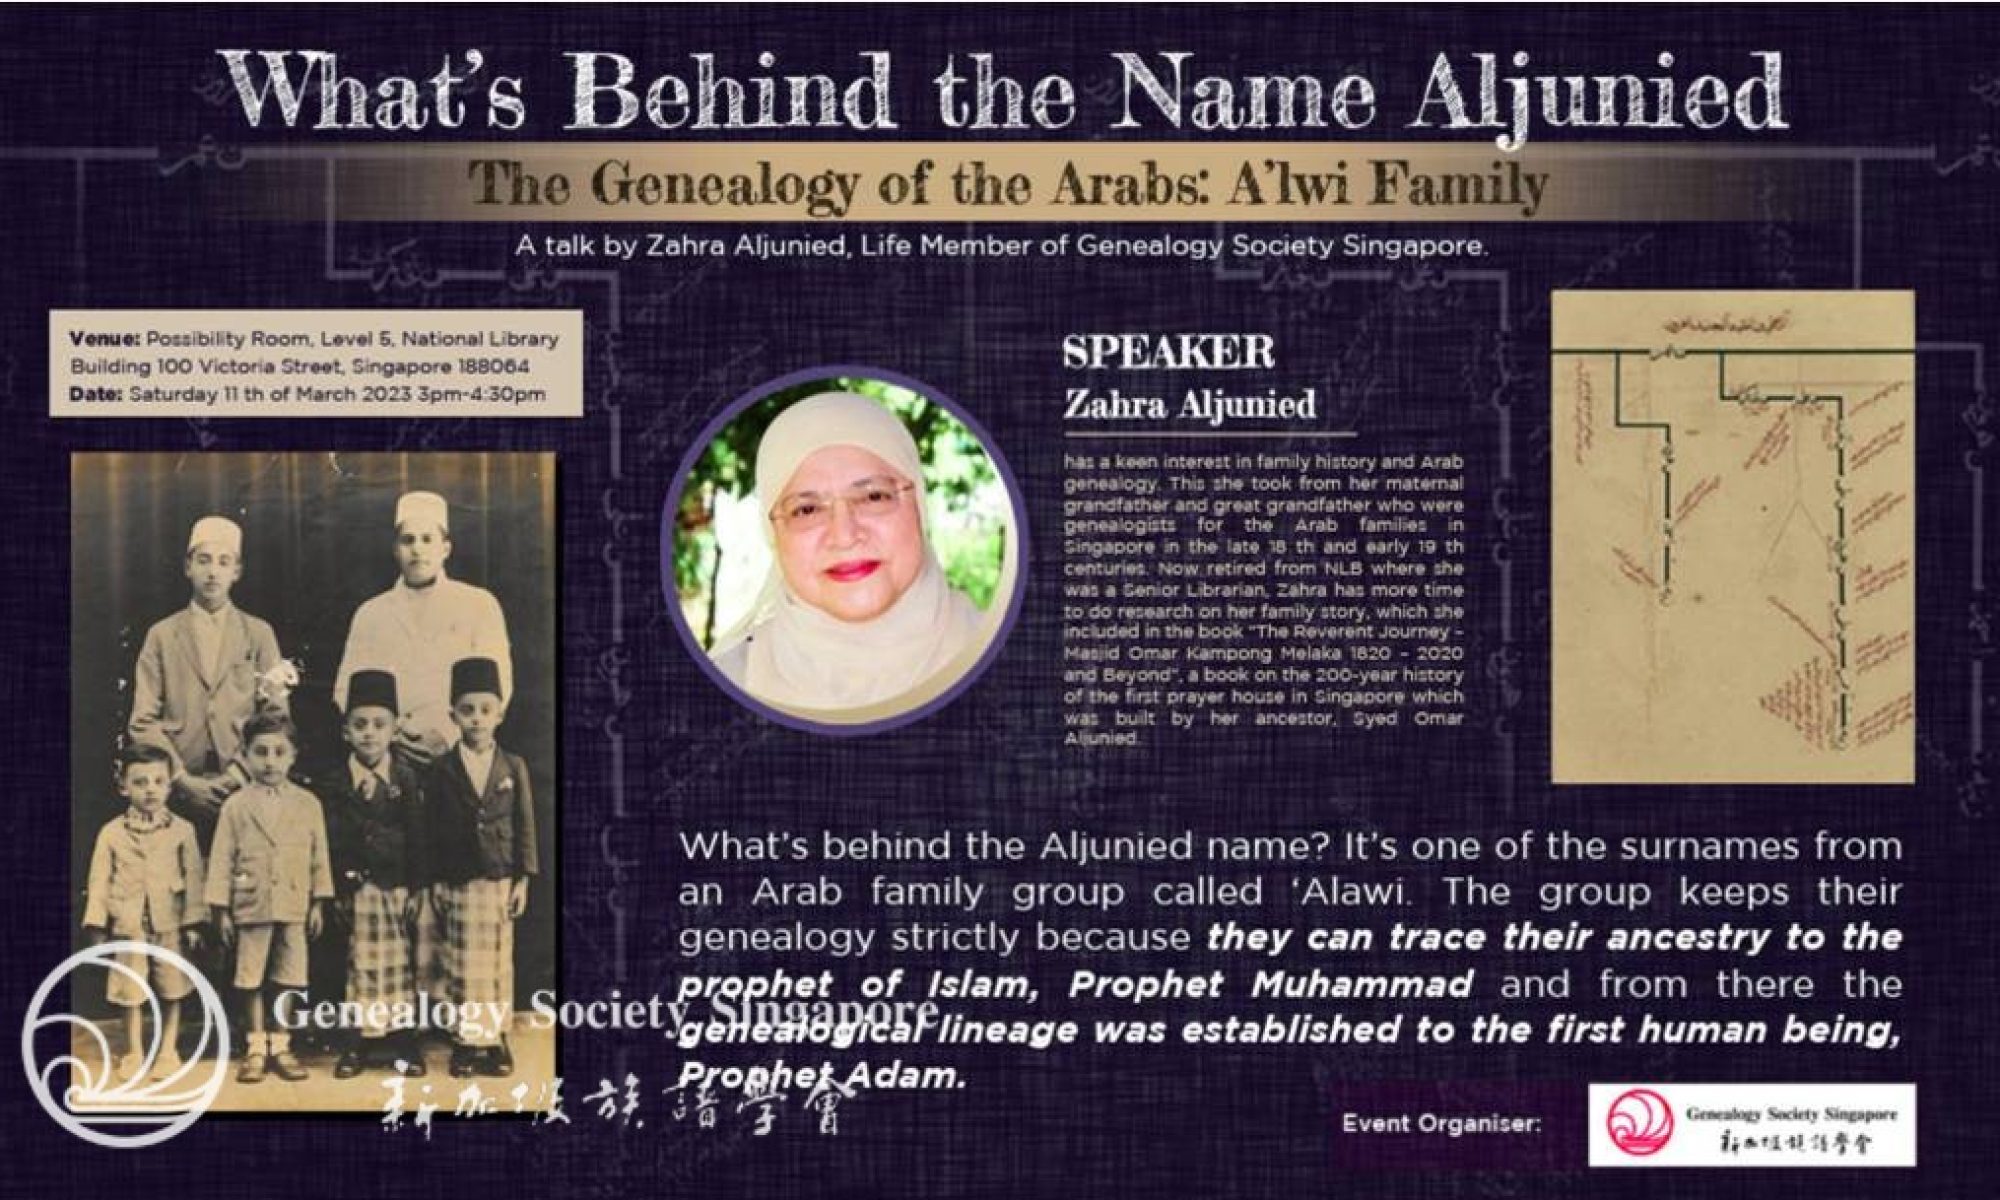 What’s Behind the Name Aljunied – The Genealogy of the Arabs: A’alwi Family